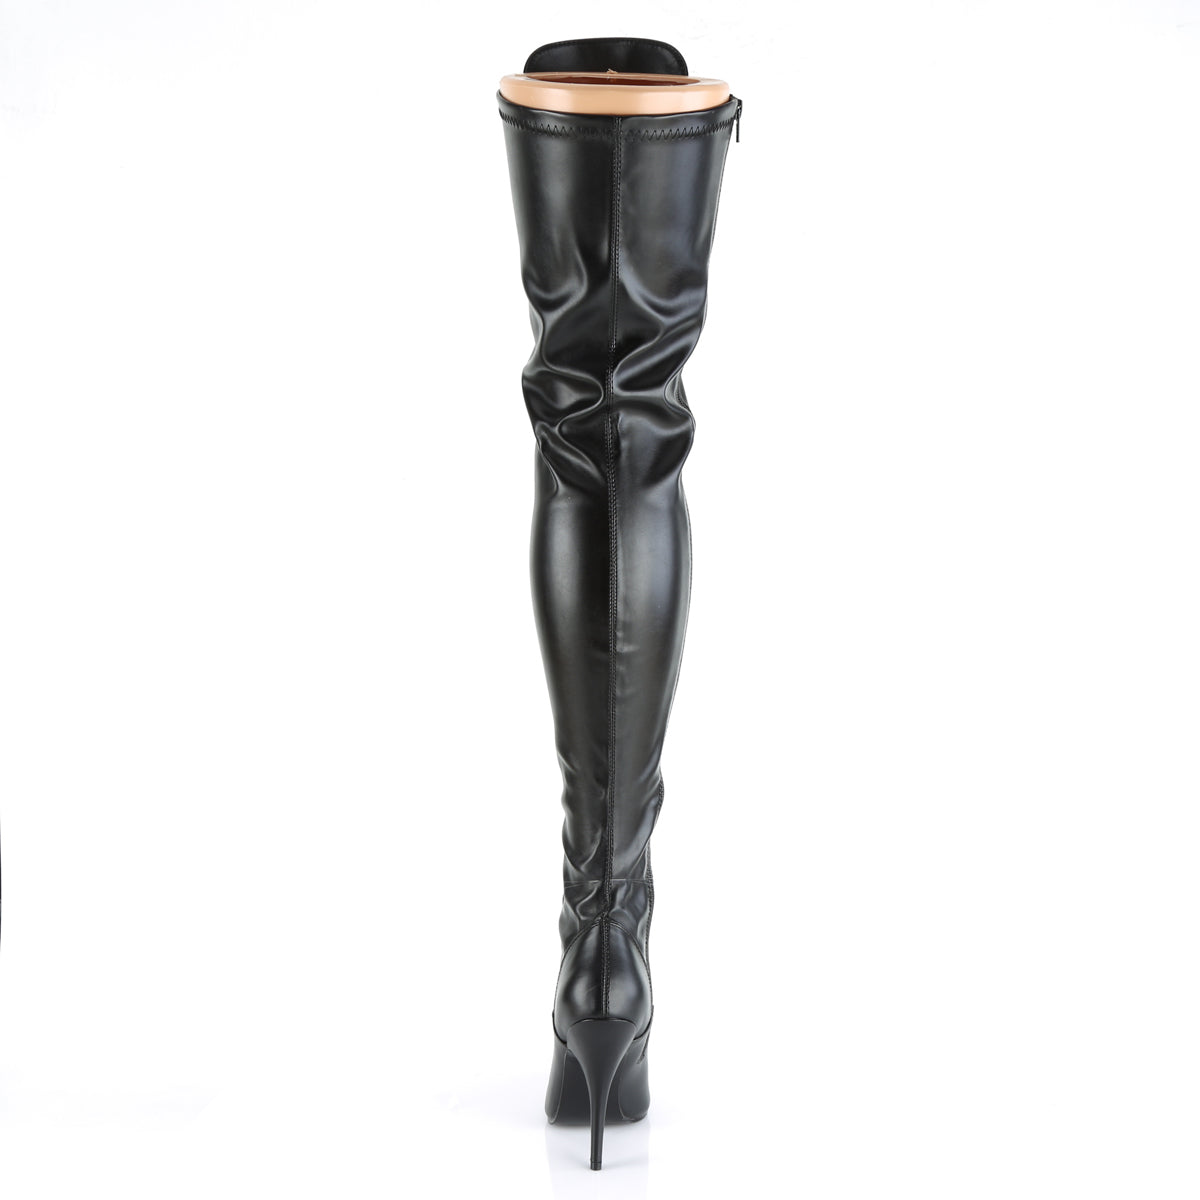 SEDUCE-3024 Pleaser Thigh Boots 5" Heel Black Fetish Shoes-Pleaser- Sexy Shoes Fetish Footwear